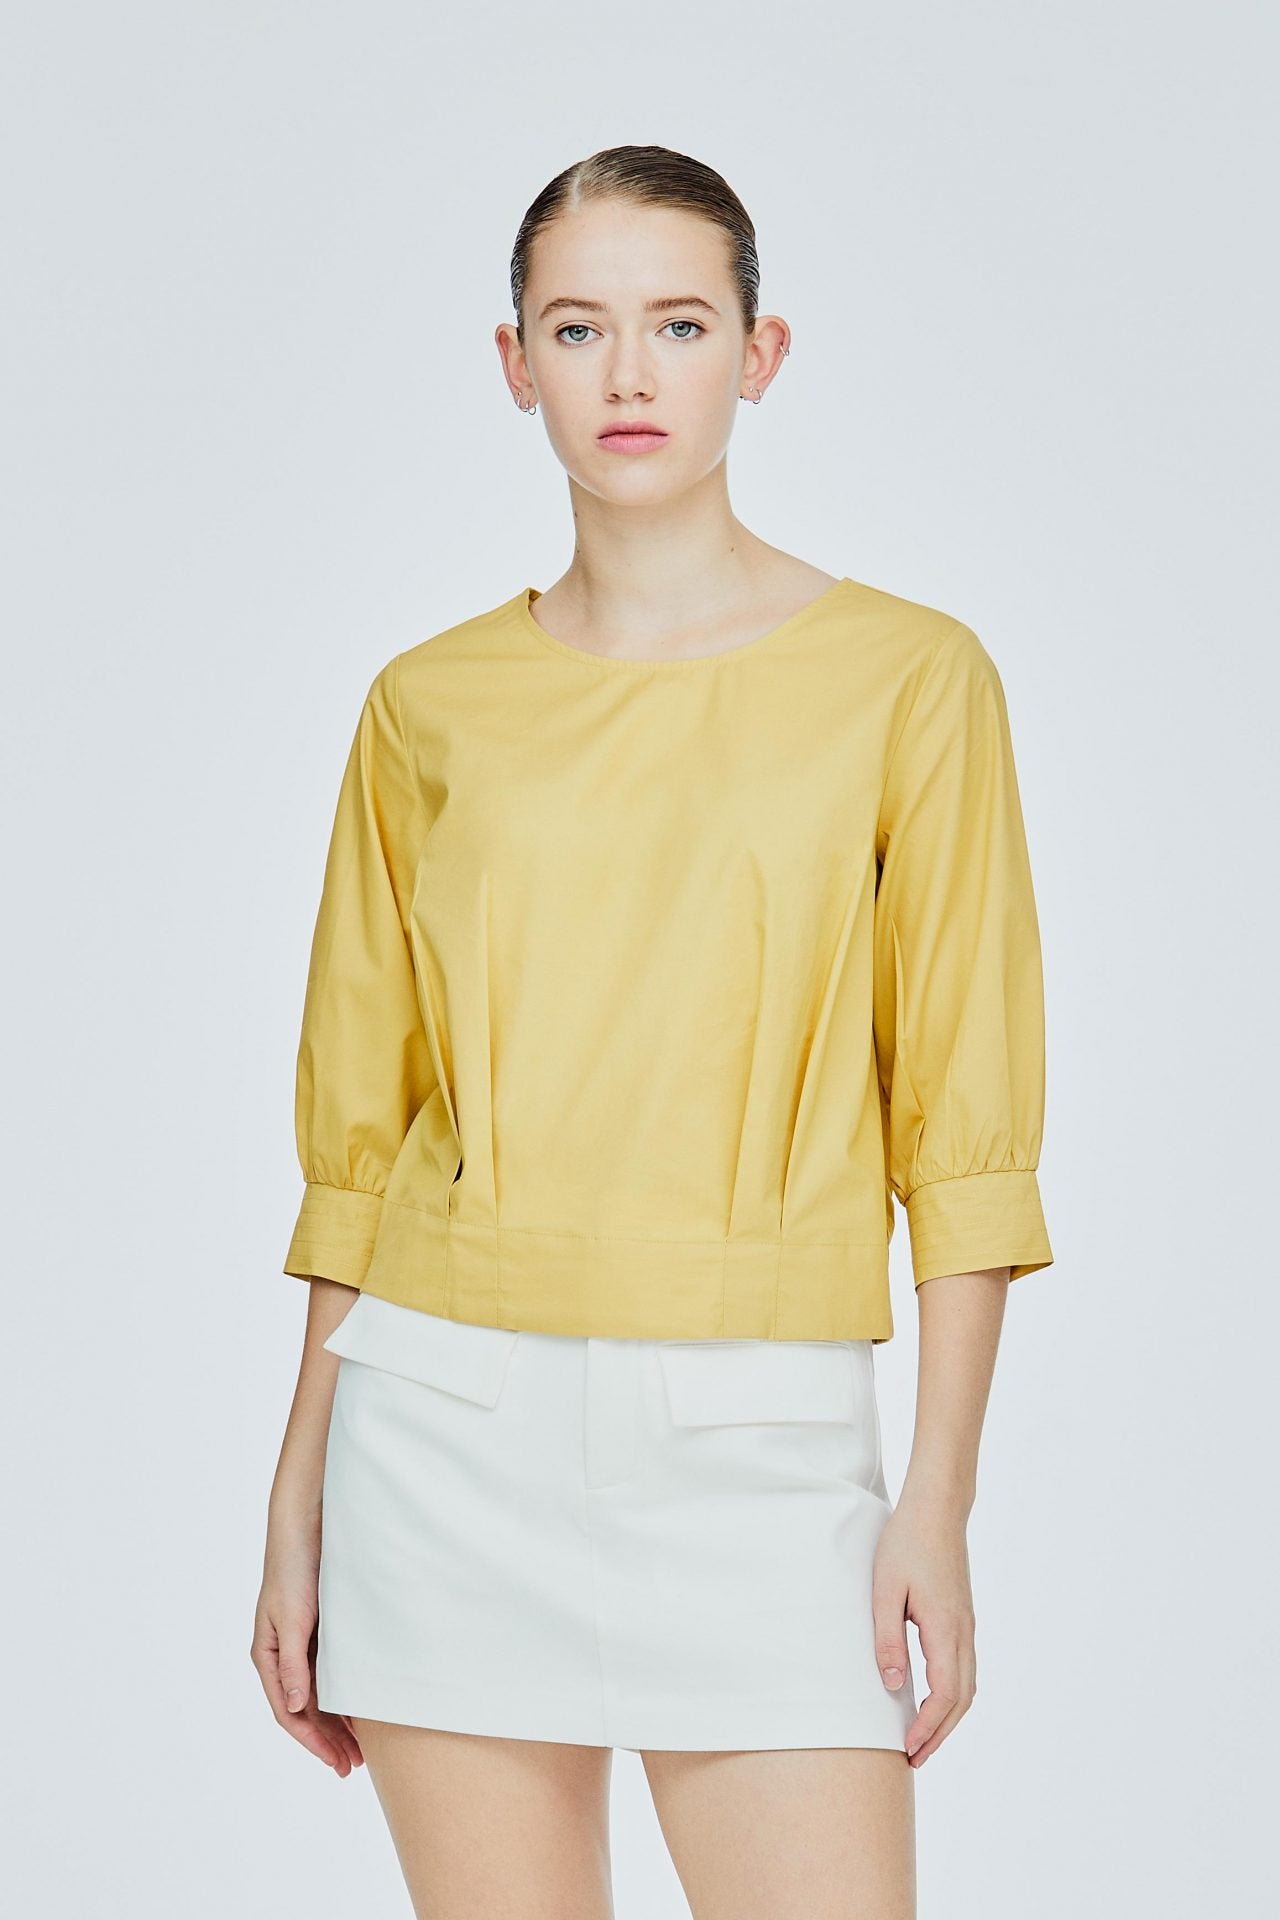 ABL 11544 PLEATED BOXY TOP YELLOW